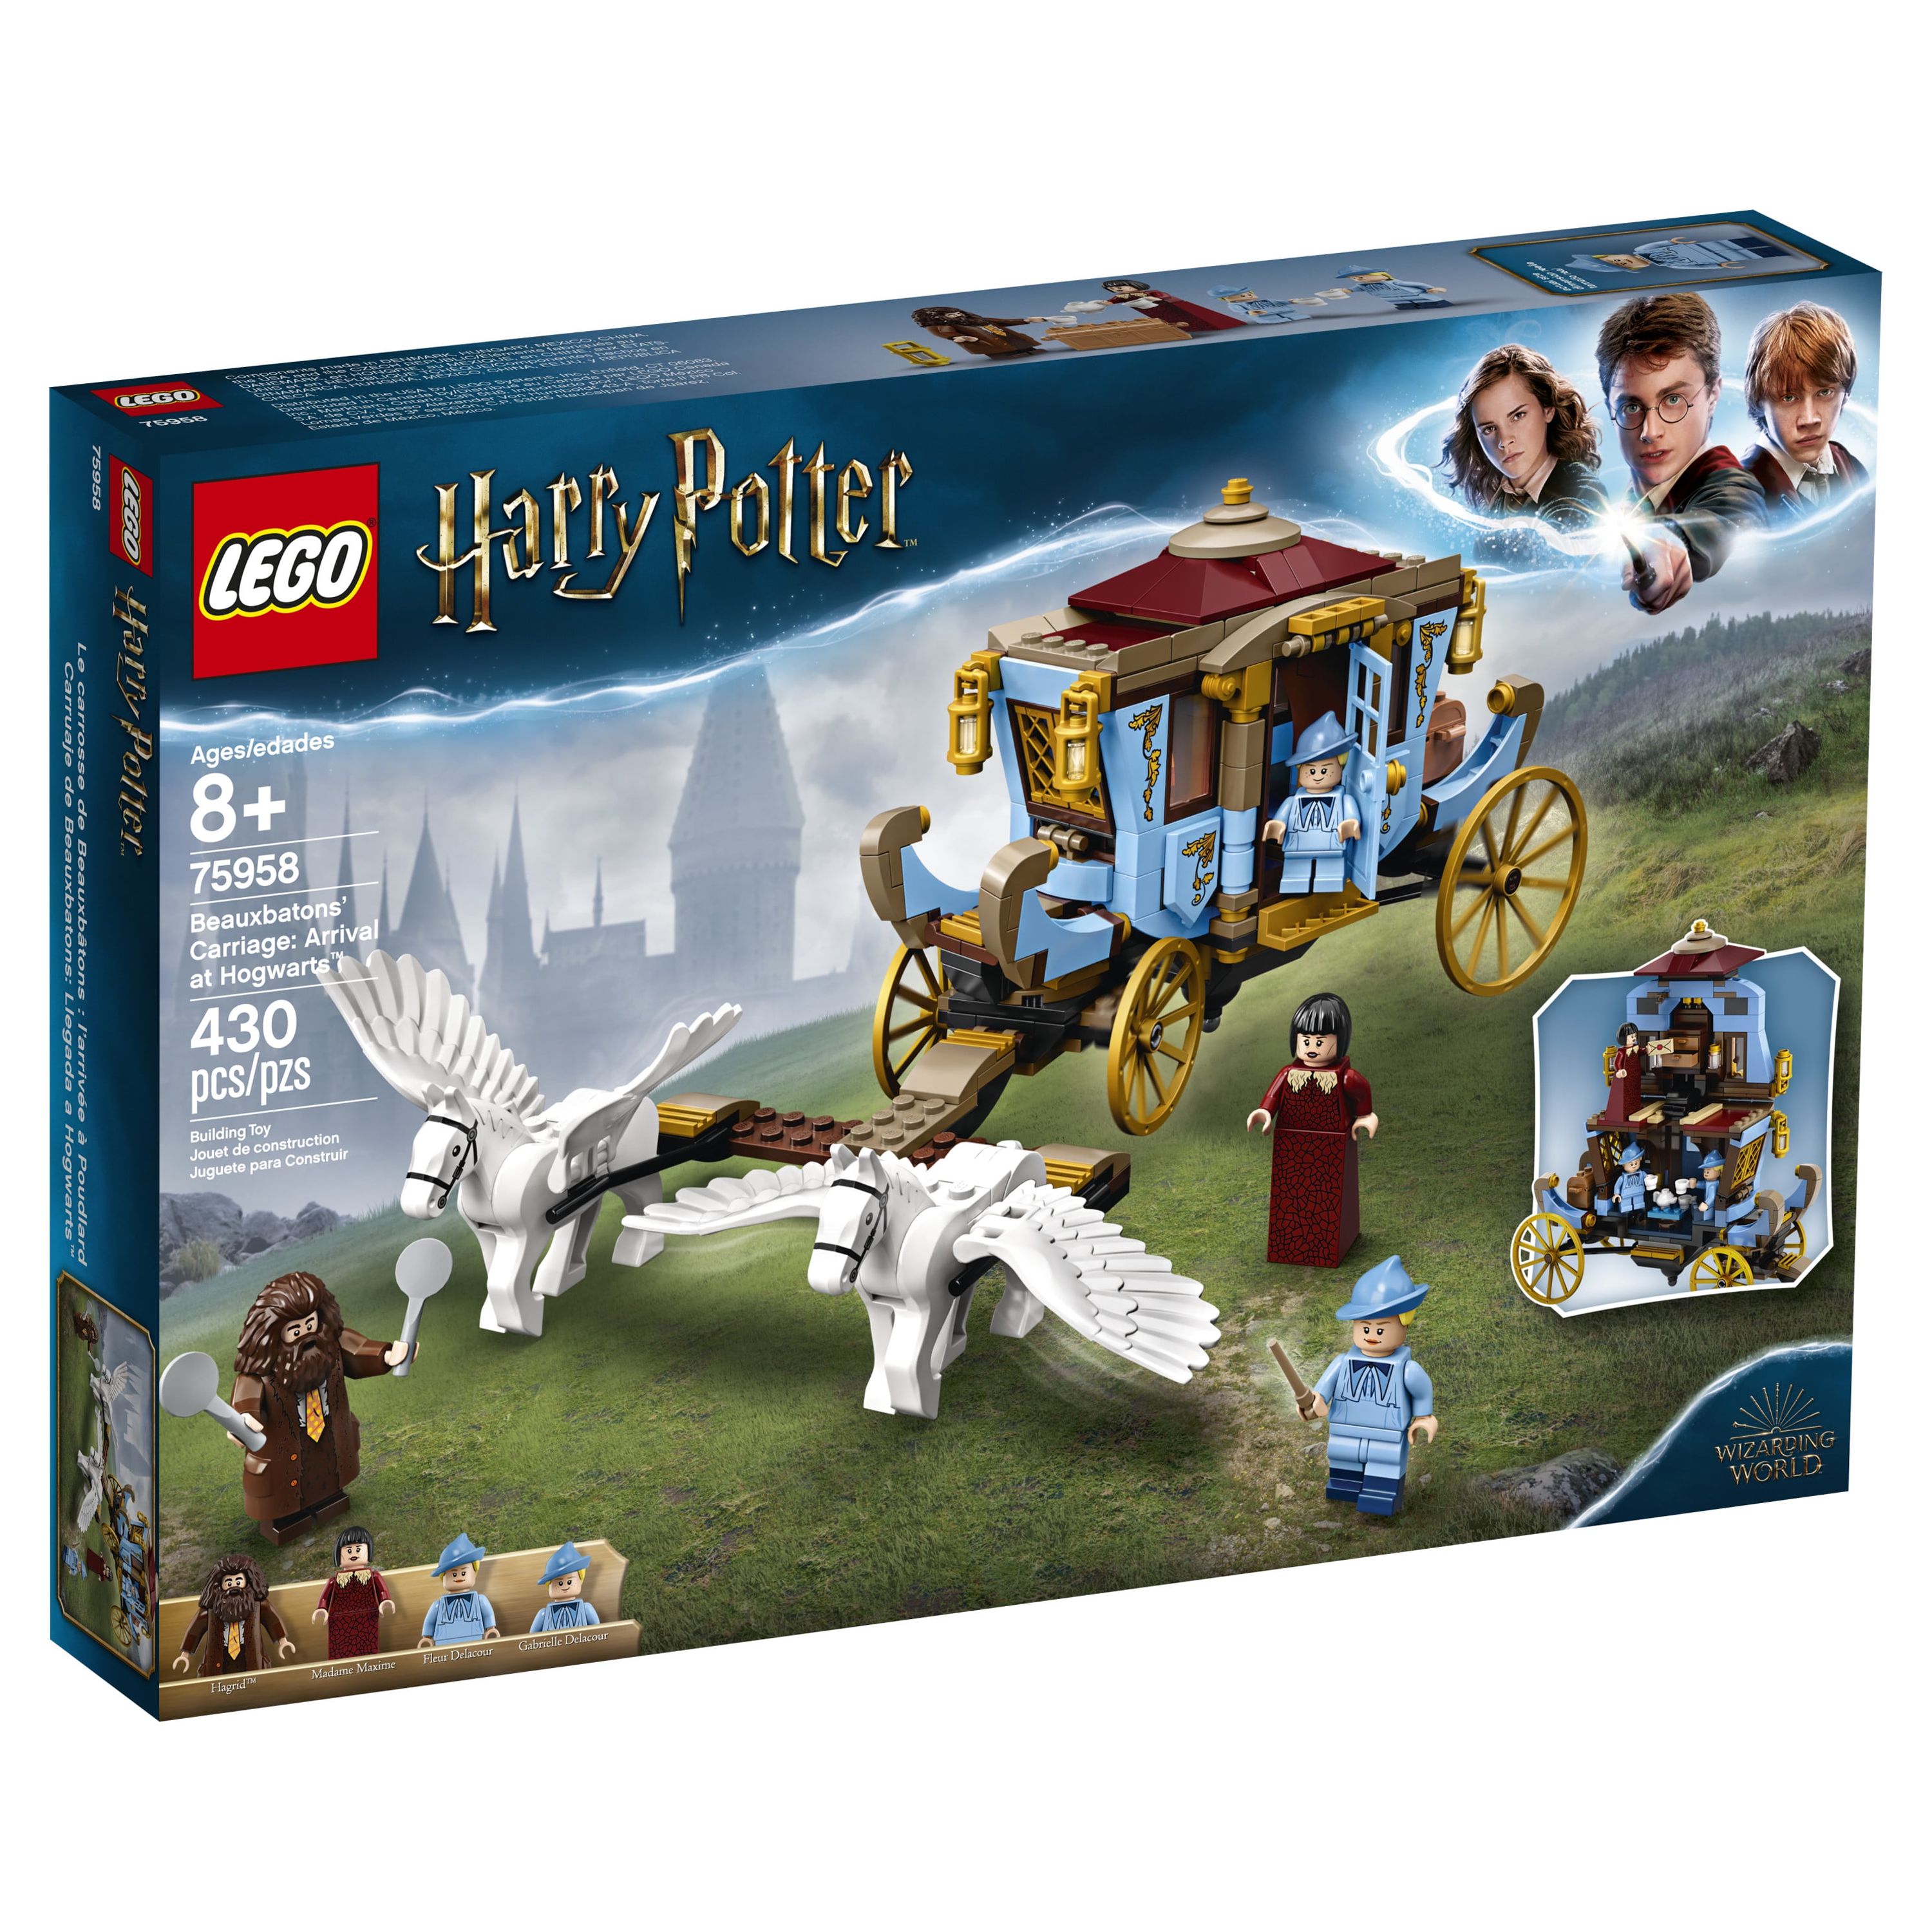 LEGO Harry Potter and the Goblet of Fire Beauxbatons' Carriage: Arrival at Hogwarts 75958 Wizard Hagrid Horses Building Toy (430 Pieces) - image 4 of 5